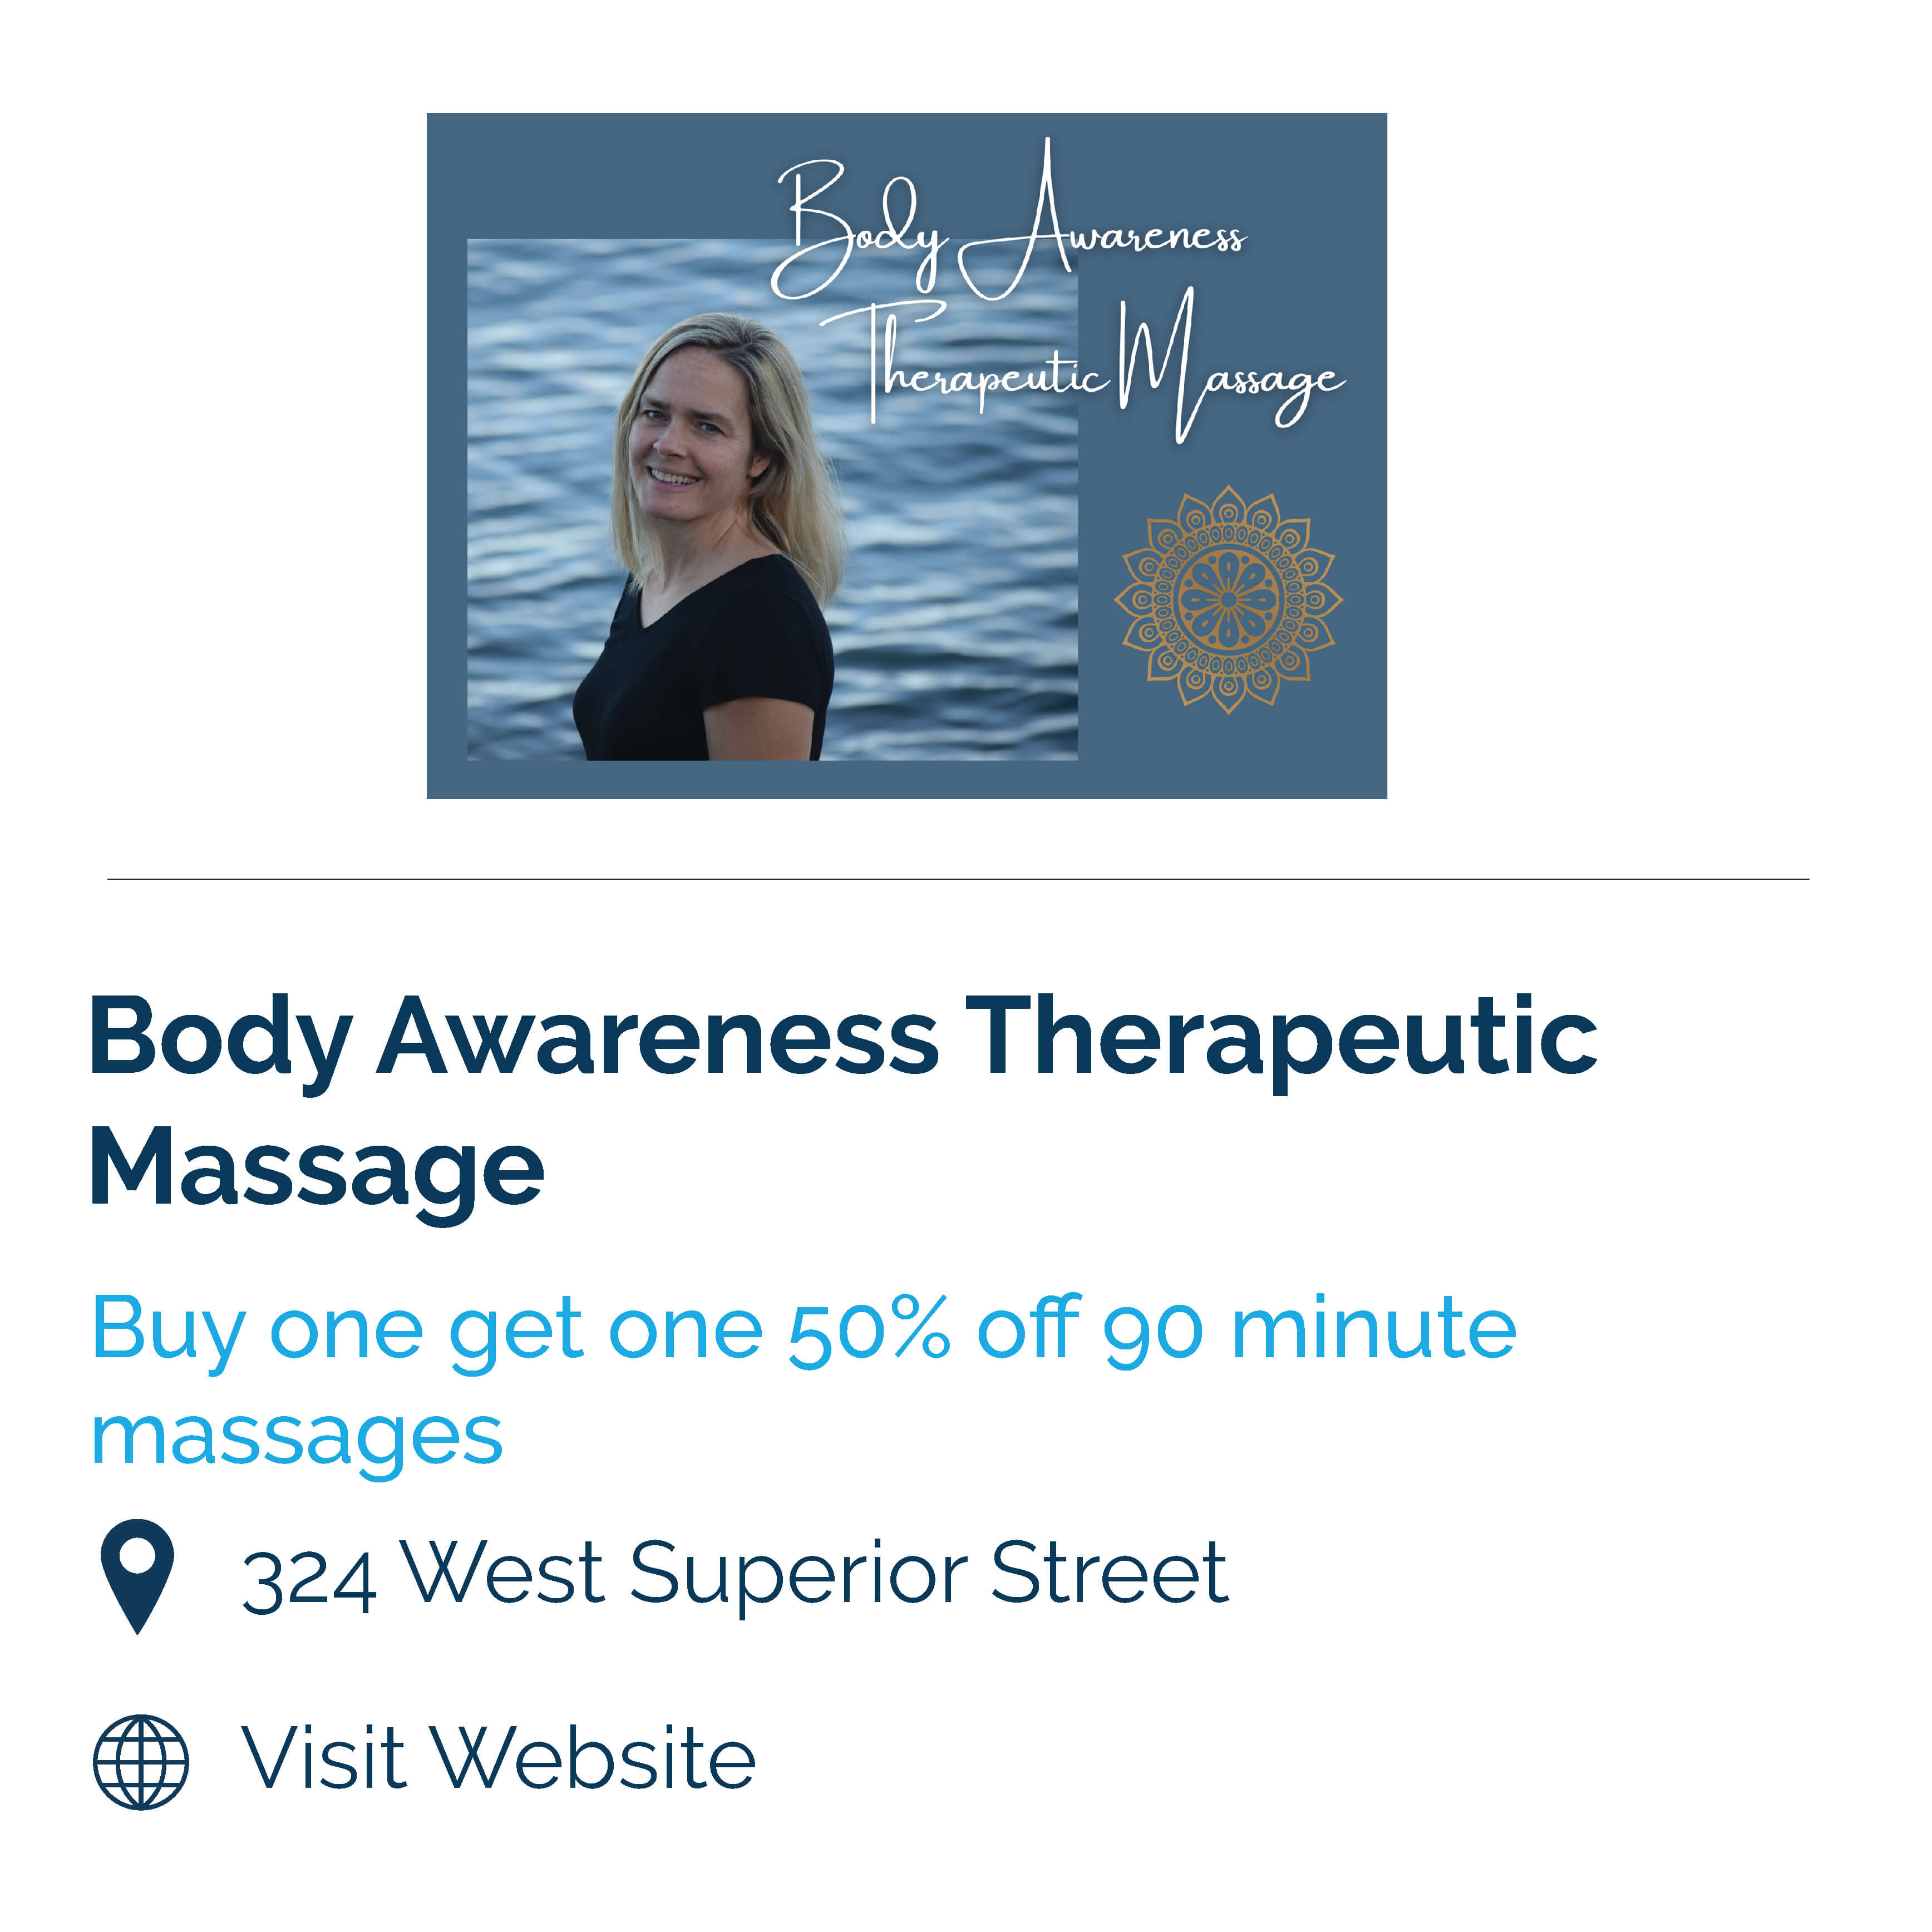 body awareness therapeutic massage. buy one get one 50% off 90 minute massages. 324 west superior street